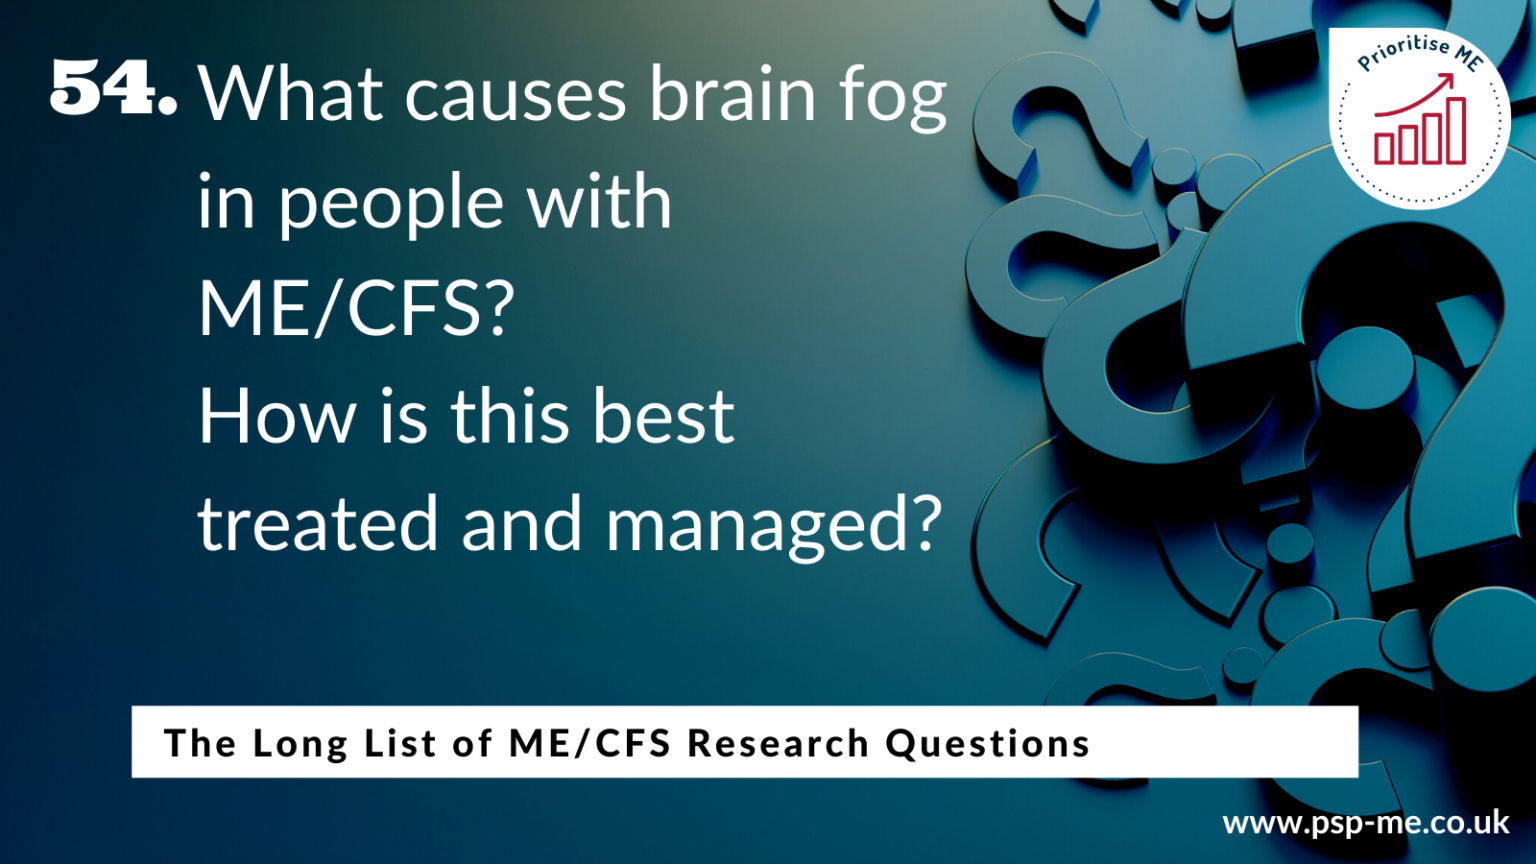 The Long List of ME_CFS Research Questions (54)